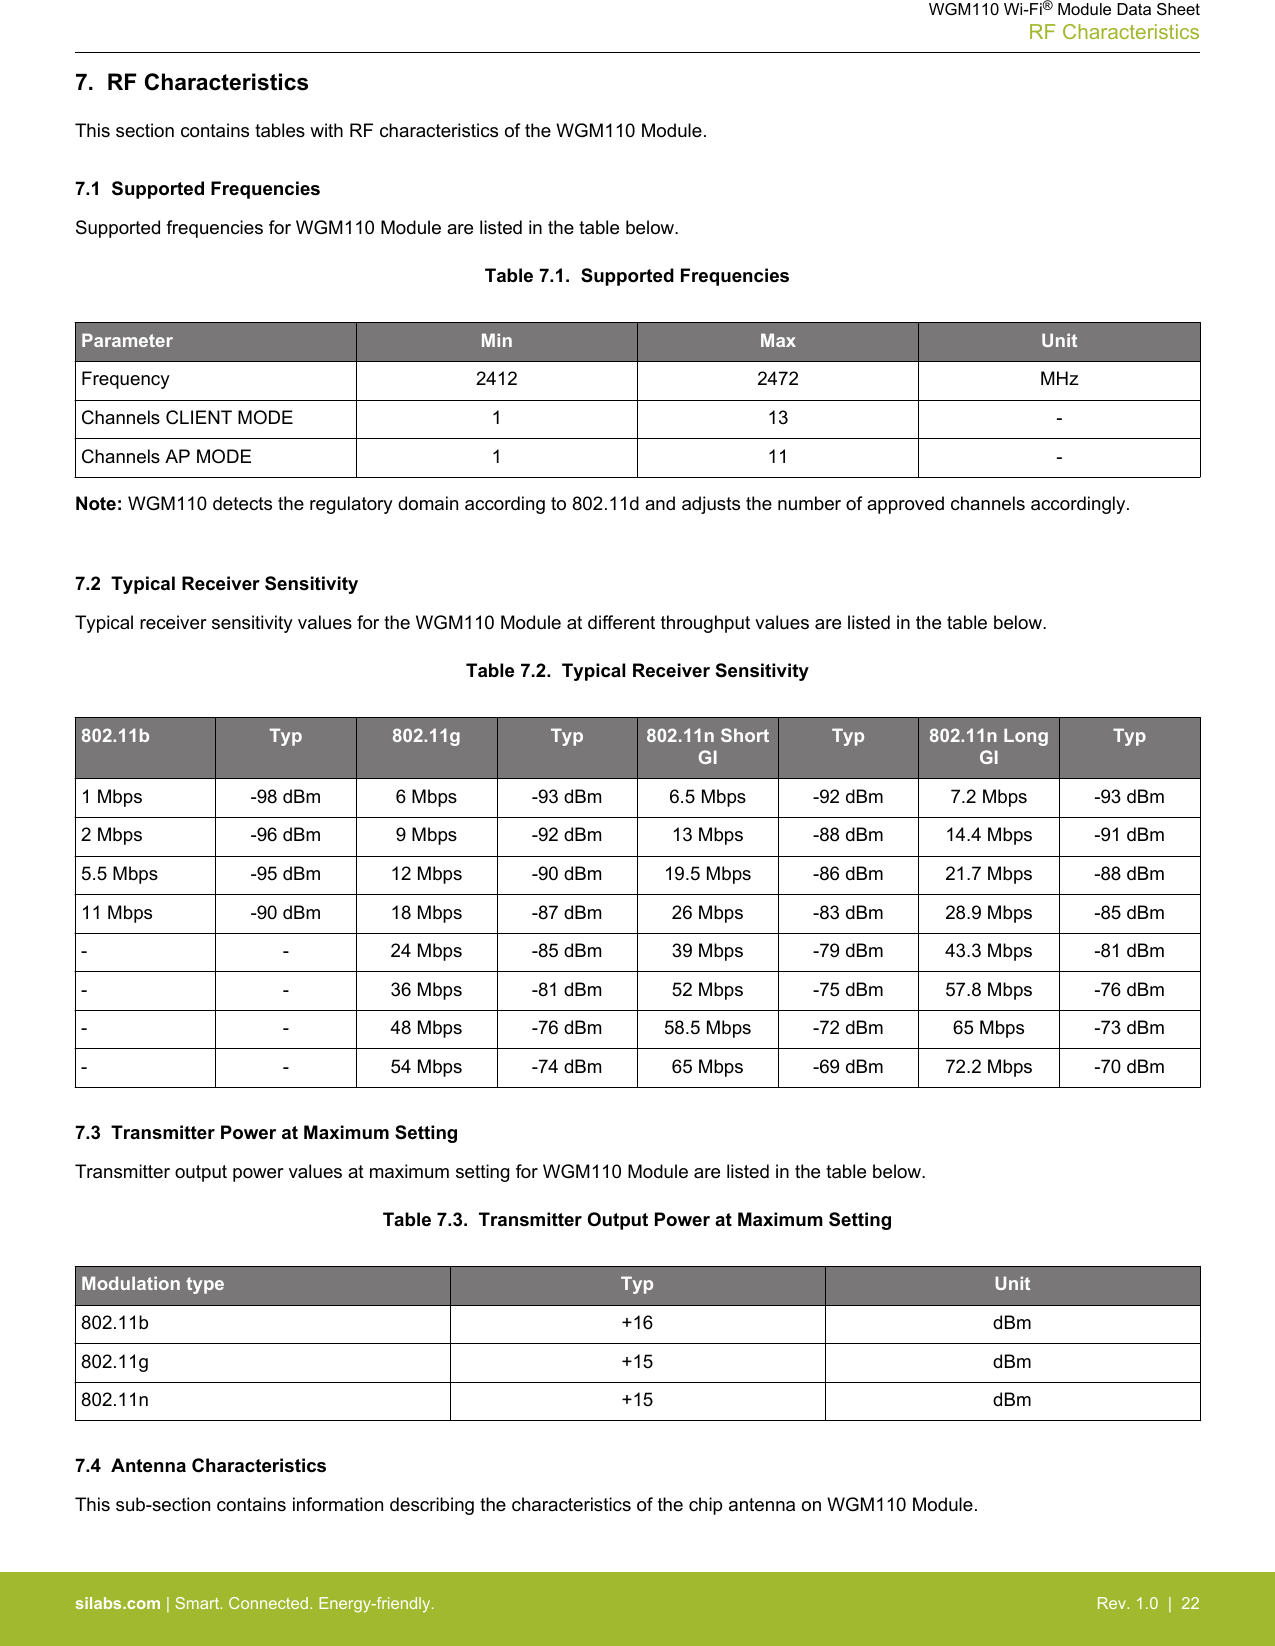 7.  RF CharacteristicsThis section contains tables with RF characteristics of the WGM110 Module.7.1  Supported FrequenciesSupported frequencies for WGM110 Module are listed in the table below.Table 7.1.  Supported FrequenciesParameter Min Max UnitFrequency 2412 2472 MHzChannels CLIENT MODE 1 13 -Channels AP MODE 1 11 -Note: WGM110 detects the regulatory domain according to 802.11d and adjusts the number of approved channels accordingly. 7.2  Typical Receiver SensitivityTypical receiver sensitivity values for the WGM110 Module at different throughput values are listed in the table below.Table 7.2.  Typical Receiver Sensitivity802.11b Typ 802.11g Typ 802.11n ShortGITyp 802.11n LongGITyp1 Mbps -98 dBm 6 Mbps -93 dBm 6.5 Mbps -92 dBm 7.2 Mbps -93 dBm2 Mbps -96 dBm 9 Mbps -92 dBm 13 Mbps -88 dBm 14.4 Mbps -91 dBm5.5 Mbps -95 dBm 12 Mbps -90 dBm 19.5 Mbps -86 dBm 21.7 Mbps -88 dBm11 Mbps -90 dBm 18 Mbps -87 dBm 26 Mbps -83 dBm 28.9 Mbps -85 dBm- - 24 Mbps -85 dBm 39 Mbps -79 dBm 43.3 Mbps -81 dBm- - 36 Mbps -81 dBm 52 Mbps -75 dBm 57.8 Mbps -76 dBm- - 48 Mbps -76 dBm 58.5 Mbps -72 dBm 65 Mbps -73 dBm- - 54 Mbps -74 dBm 65 Mbps -69 dBm 72.2 Mbps -70 dBm7.3  Transmitter Power at Maximum SettingTransmitter output power values at maximum setting for WGM110 Module are listed in the table below.Table 7.3.  Transmitter Output Power at Maximum SettingModulation type Typ Unit802.11b +16 dBm802.11g +15 dBm802.11n +15 dBm7.4  Antenna CharacteristicsThis sub-section contains information describing the characteristics of the chip antenna on WGM110 Module.WGM110 Wi-Fi® Module Data SheetRF Characteristicssilabs.com | Smart. Connected. Energy-friendly. Rev. 1.0  |  22